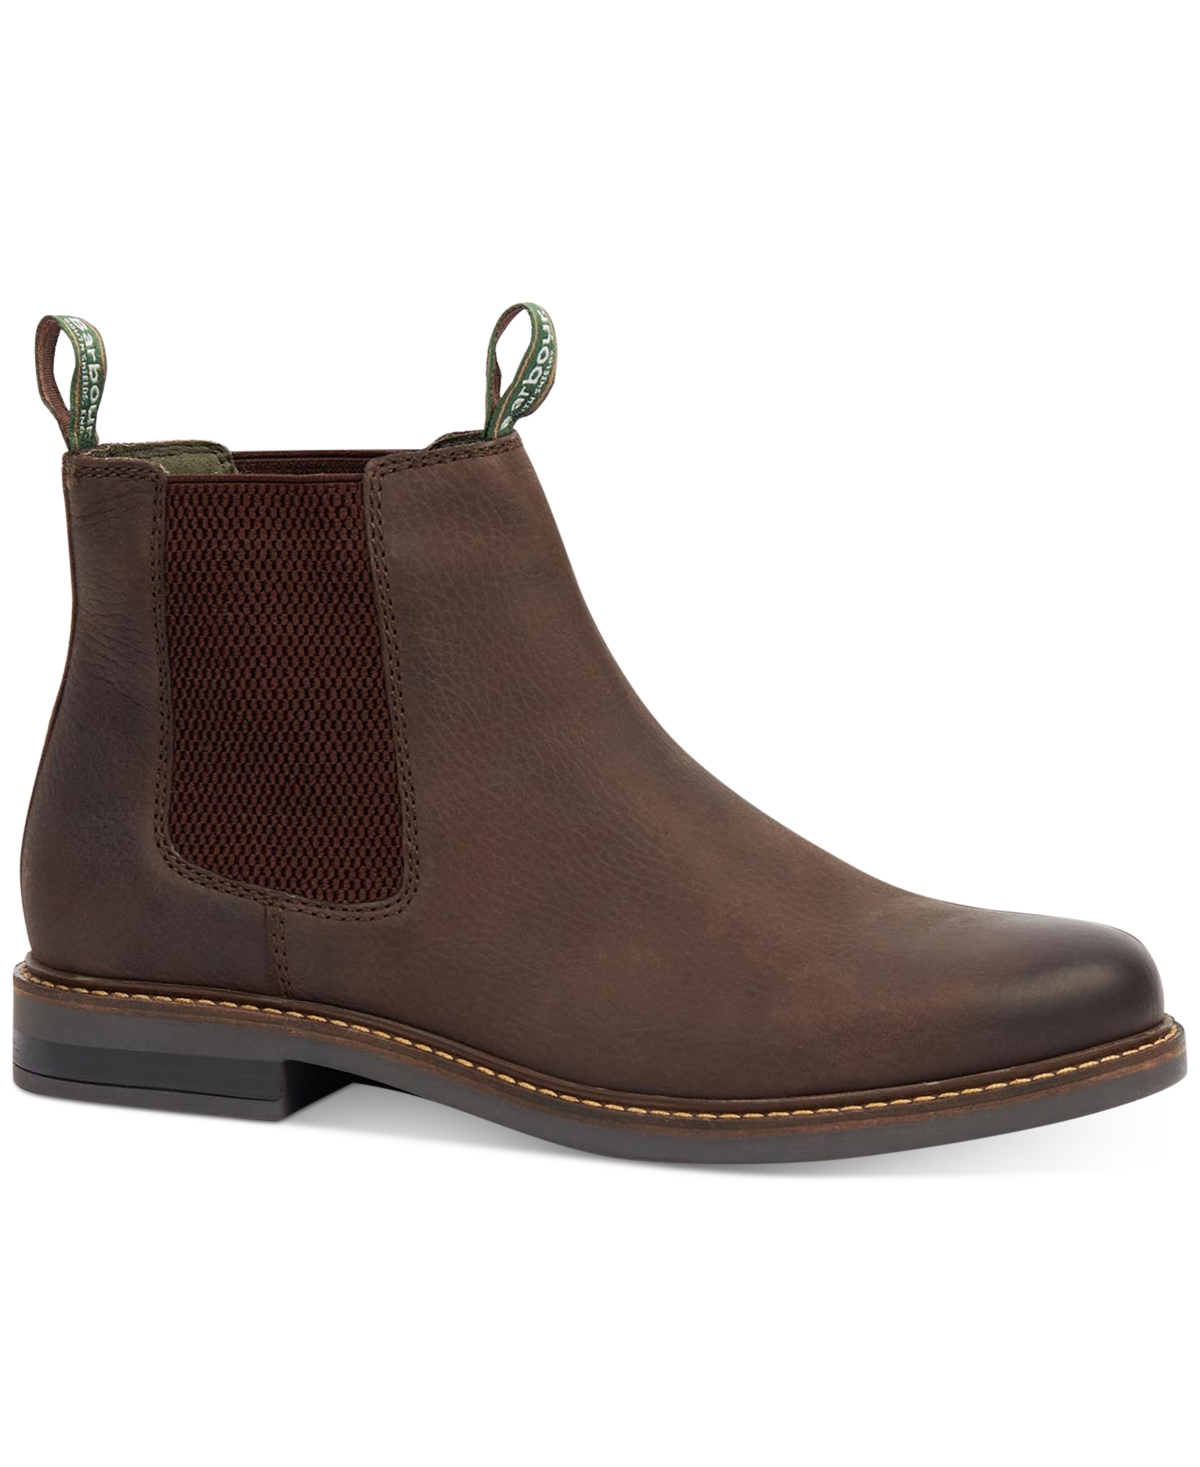 Men's Farsley Chelsea Boot - Fawn Suede